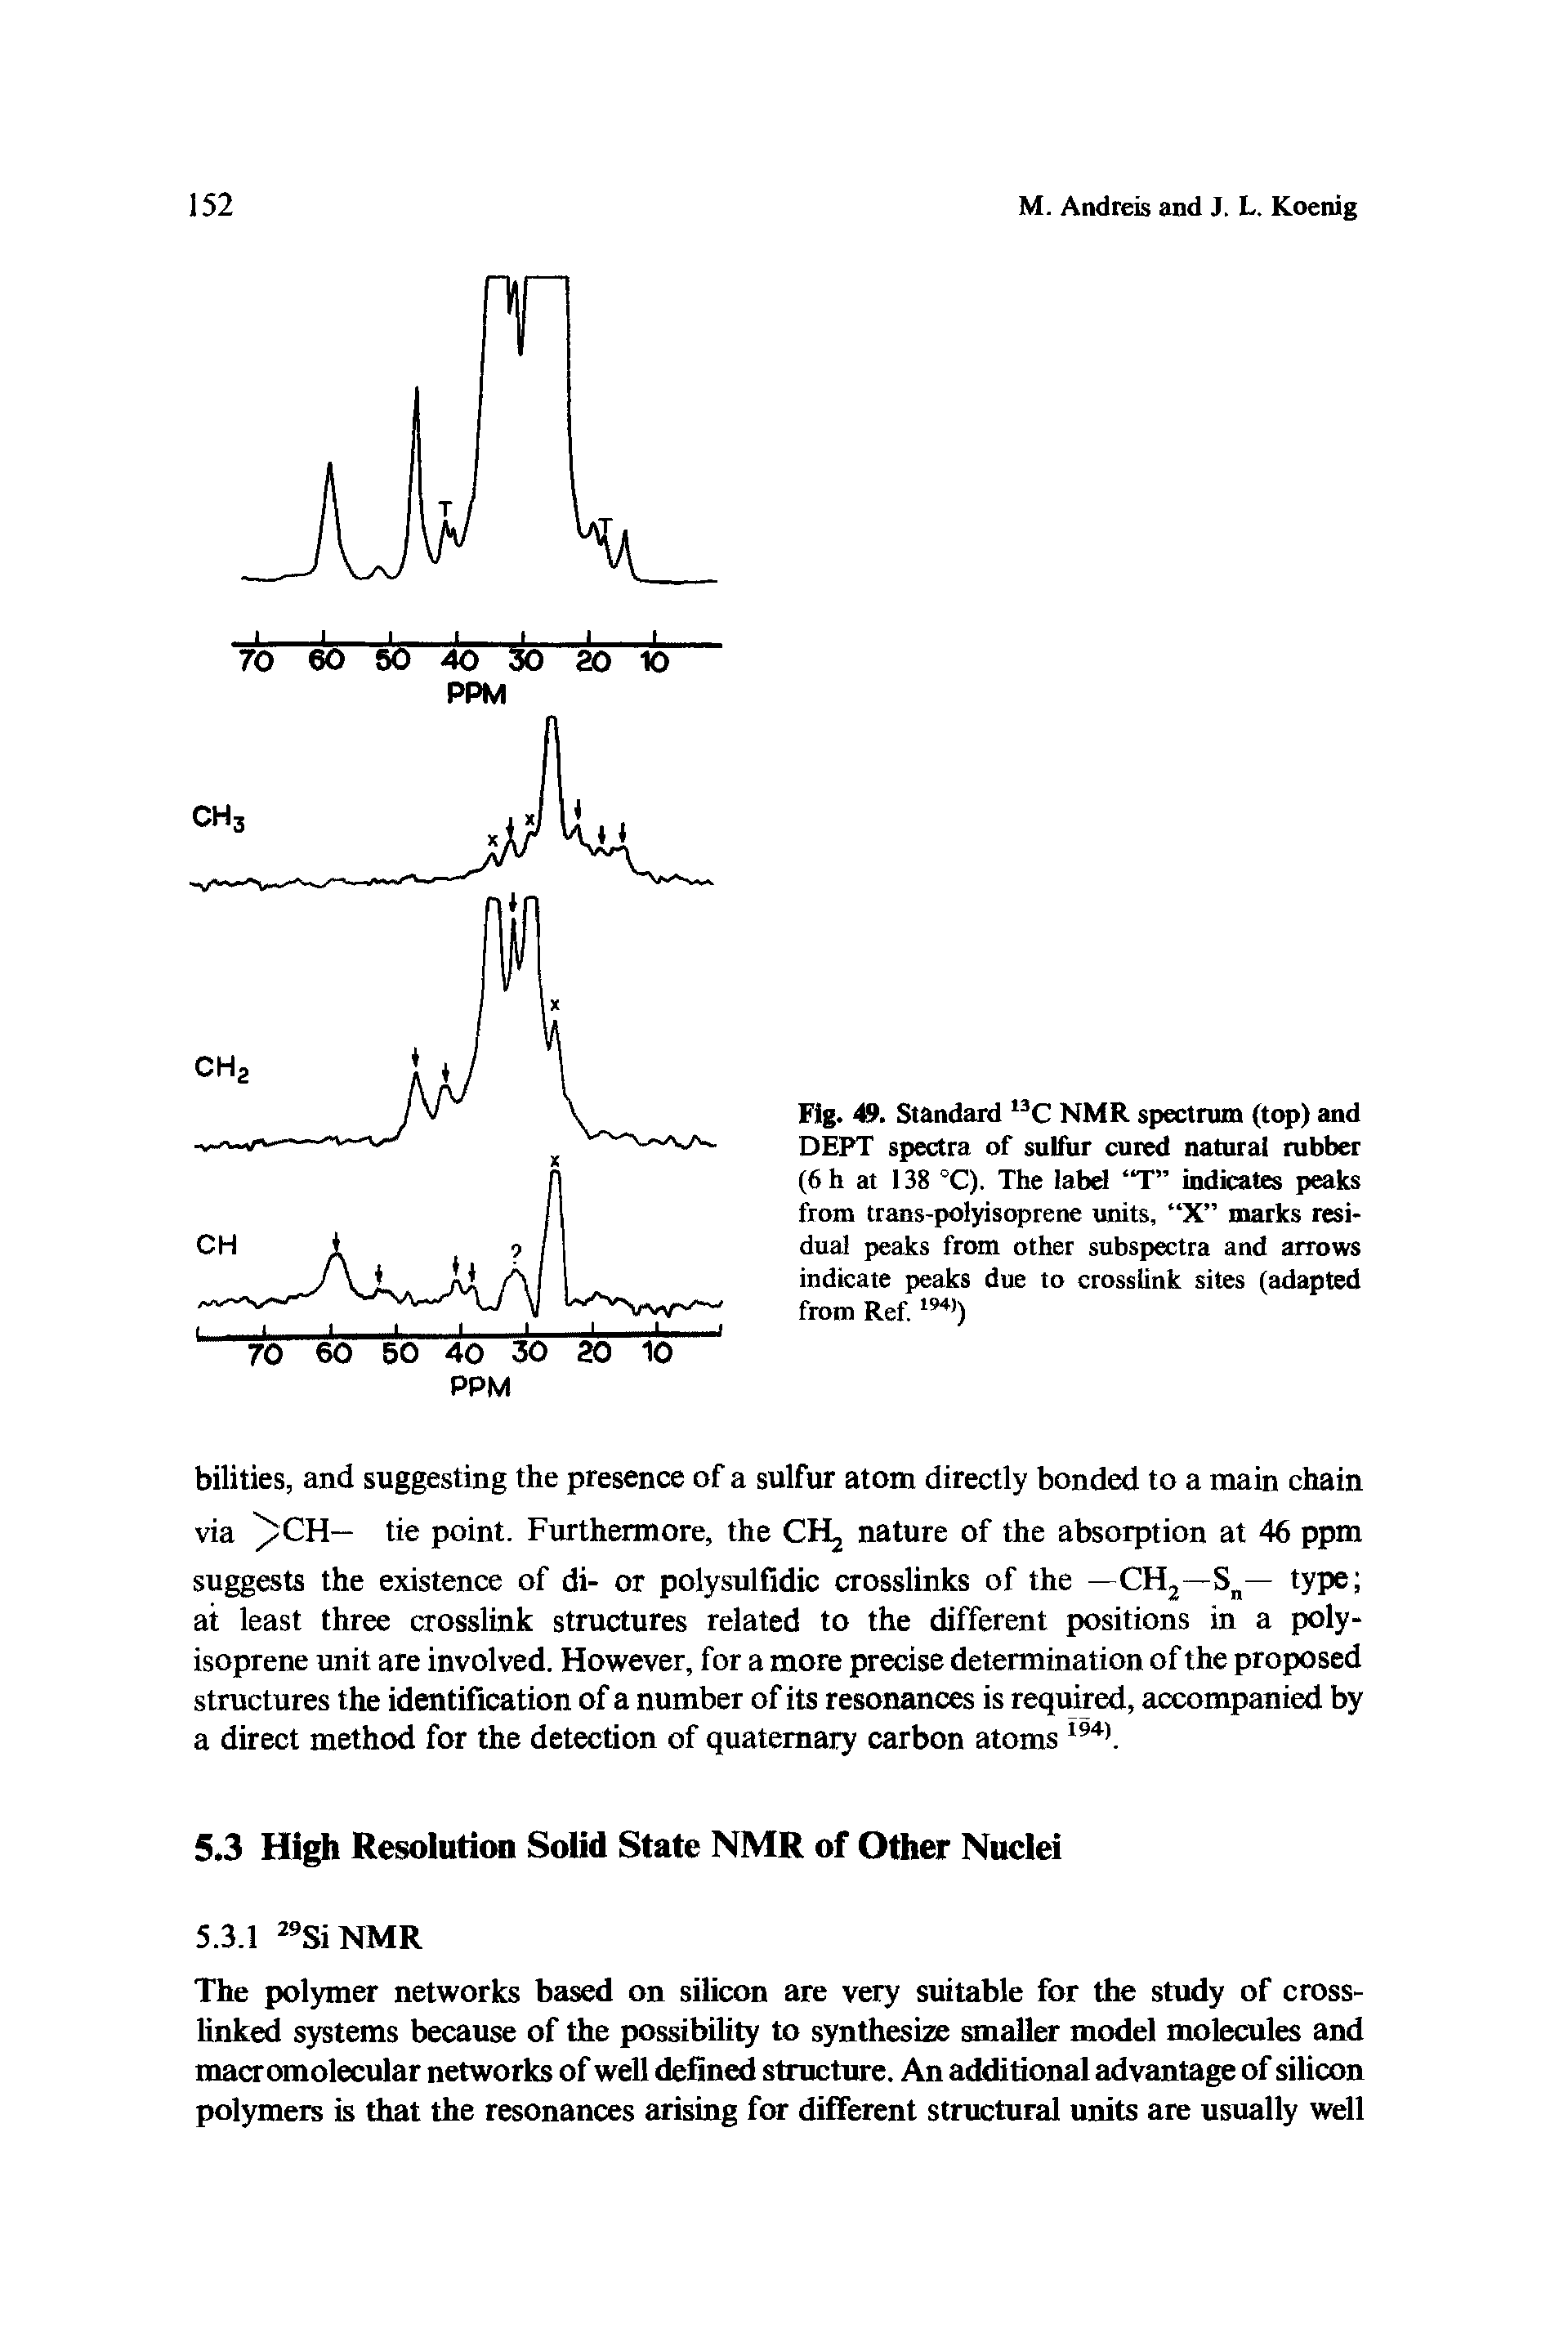 Fig. 49. Standard 13C NMR spectrum (top) and DEPT spectra of sulfur cured natural rubber (6h at 138 °C). The label T indicates peaks from trans-polyisoprene units, X marks residual peaks from other subspectra and arrows indicate peaks due to crosslink sites (adapted from Ref. 194>)...